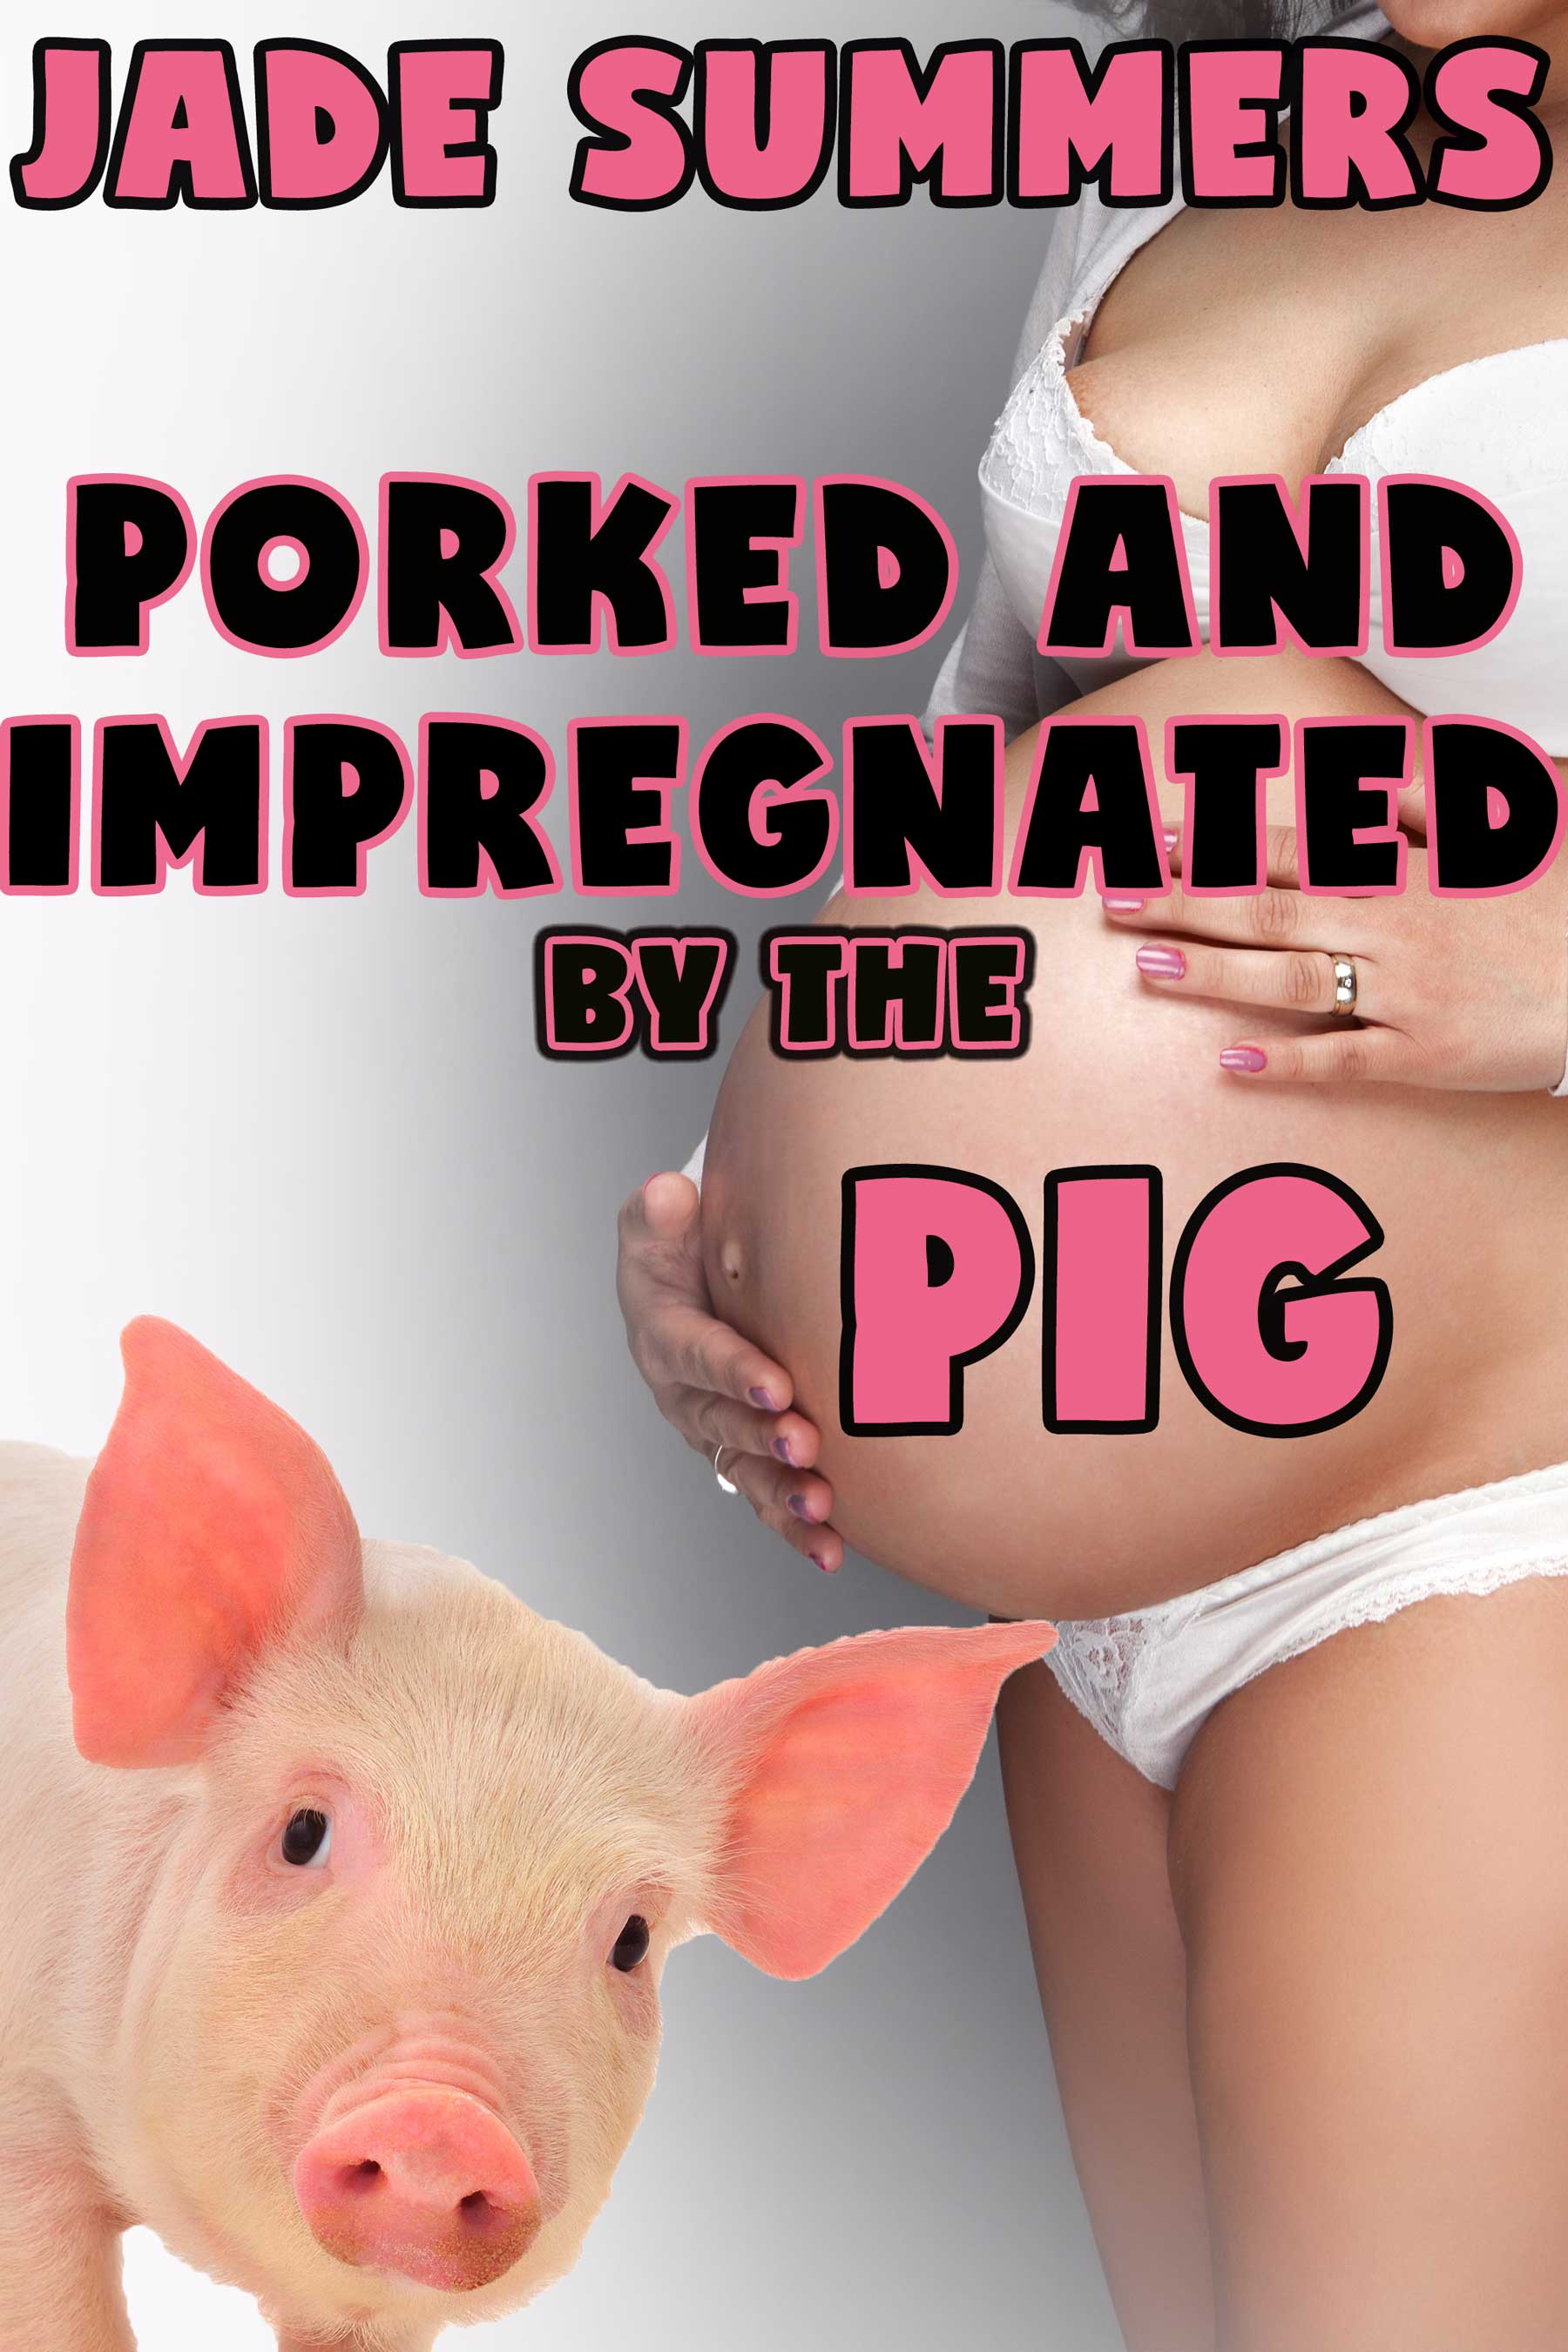 Having Sex With Pig Porn - Smashwords â€“ Porked and Impregnated by the Pig â€“ a book by Jade Summers